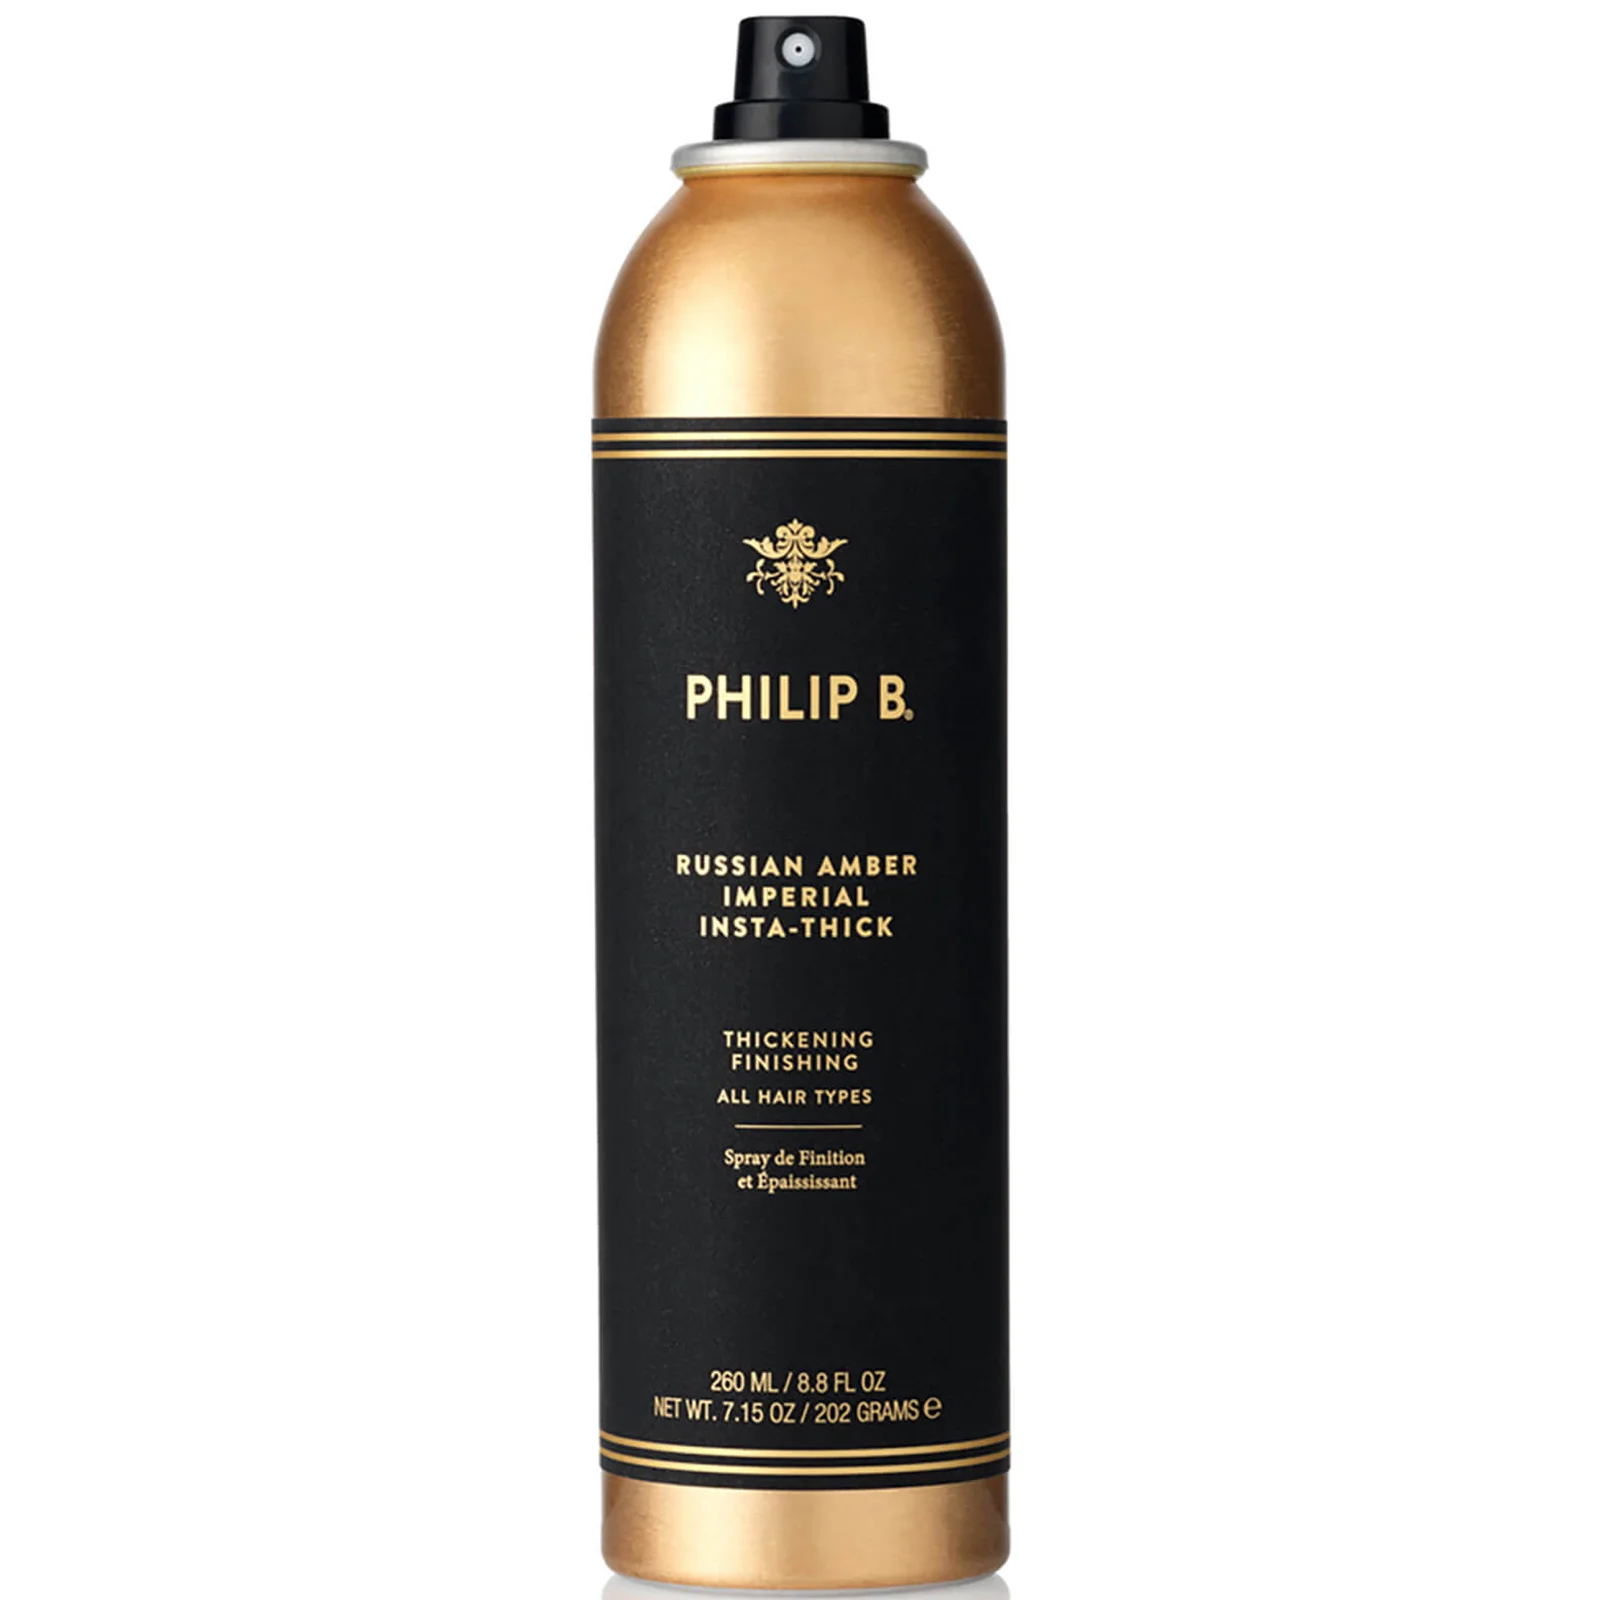 Philip B Russian Amber Imperial Insta-Thick Hair Spray (260ml) Image 1